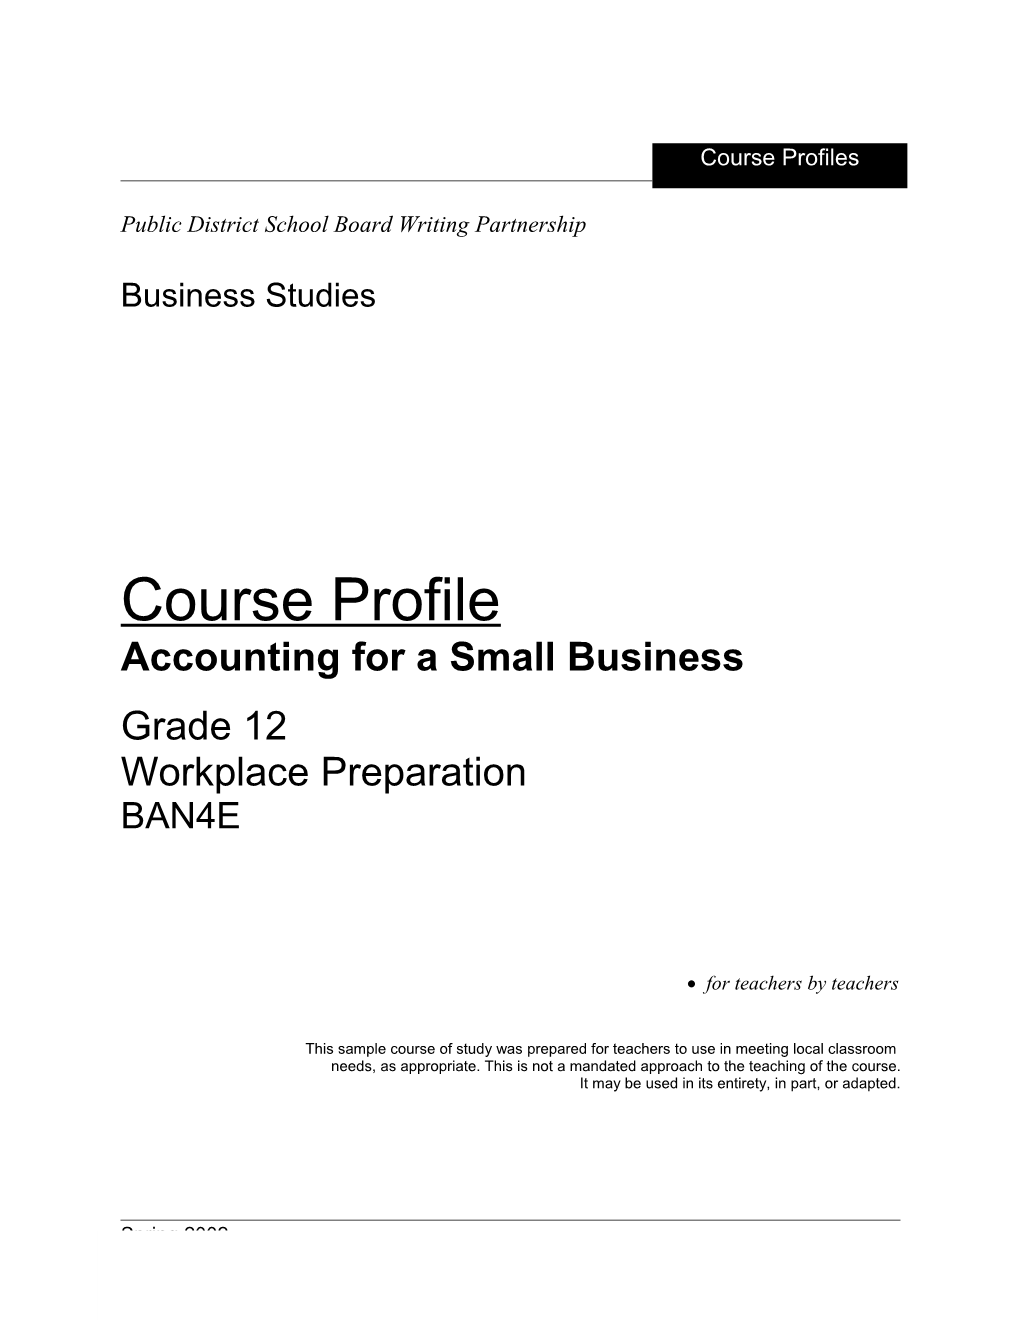 Accounting for a Small Business